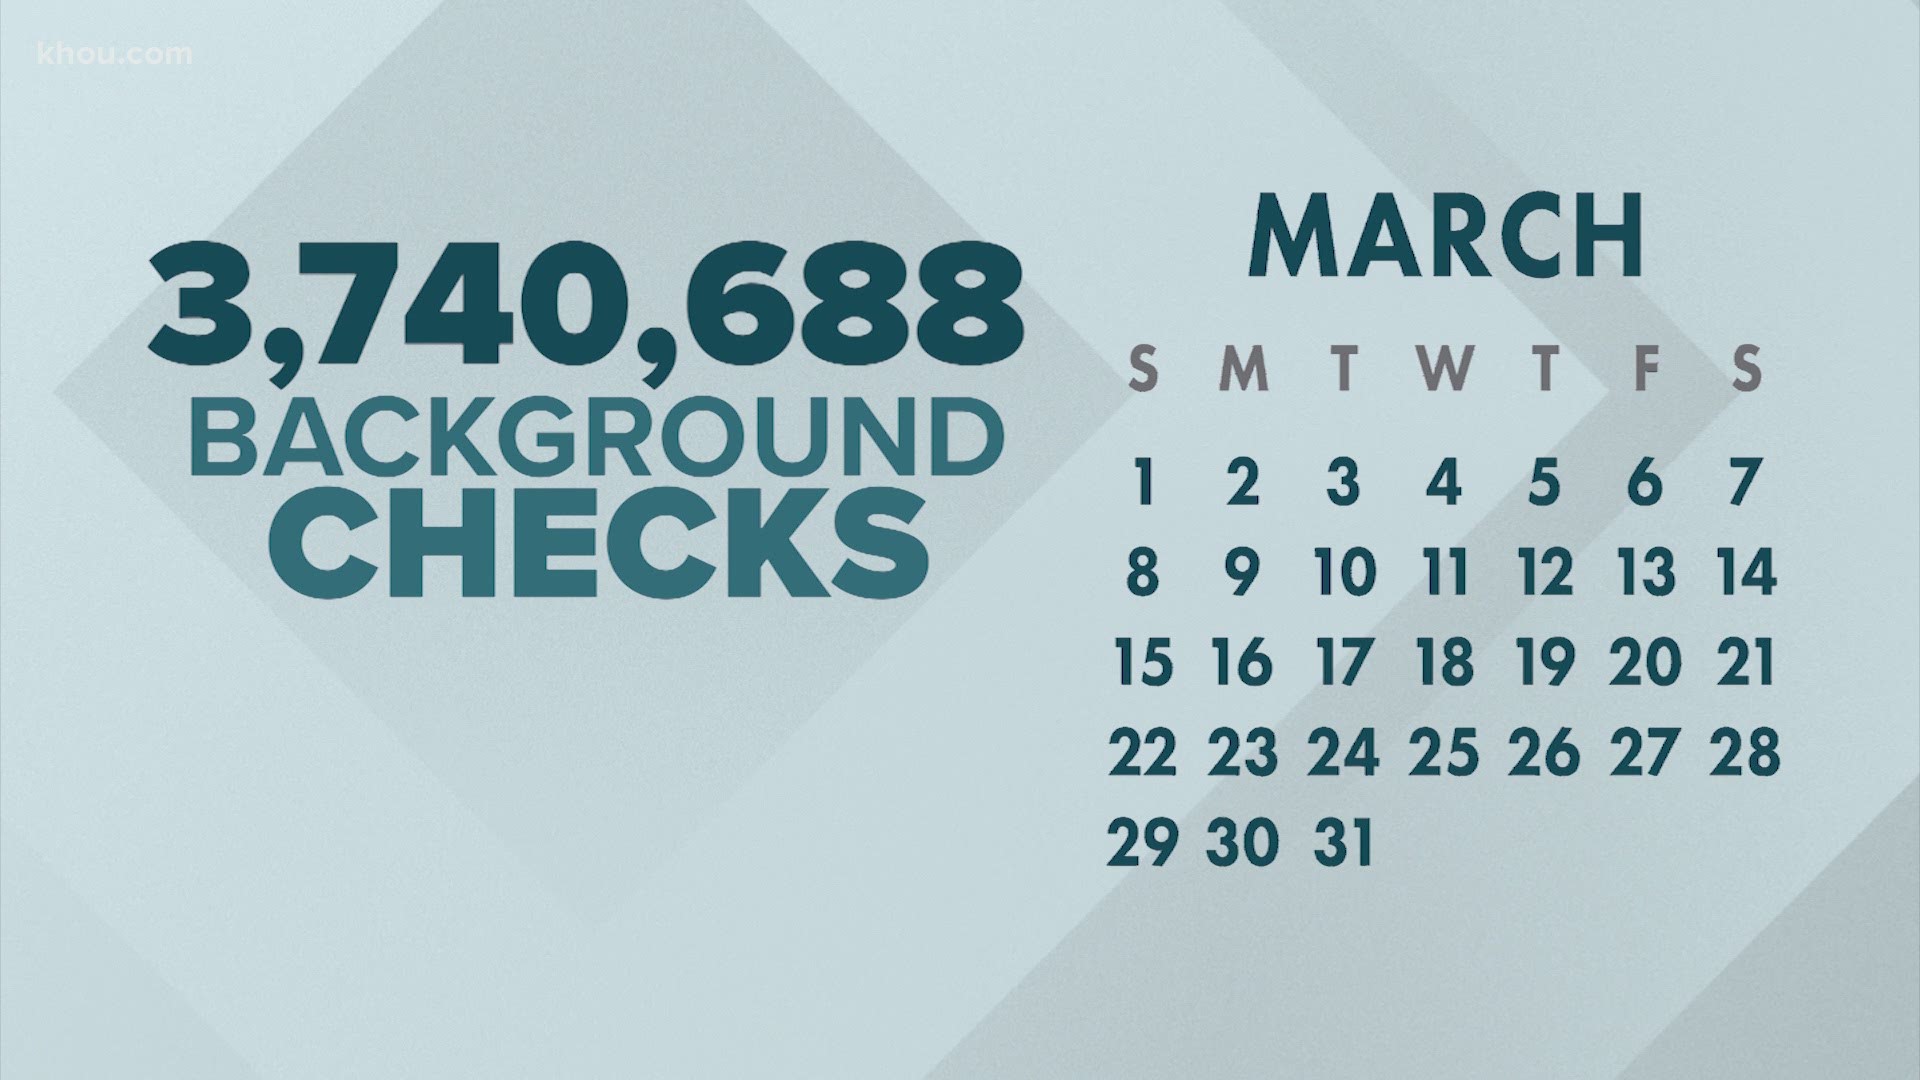 Federal statistics on background checks shows the month of March was the highest month on record for people applying to buy a gun.